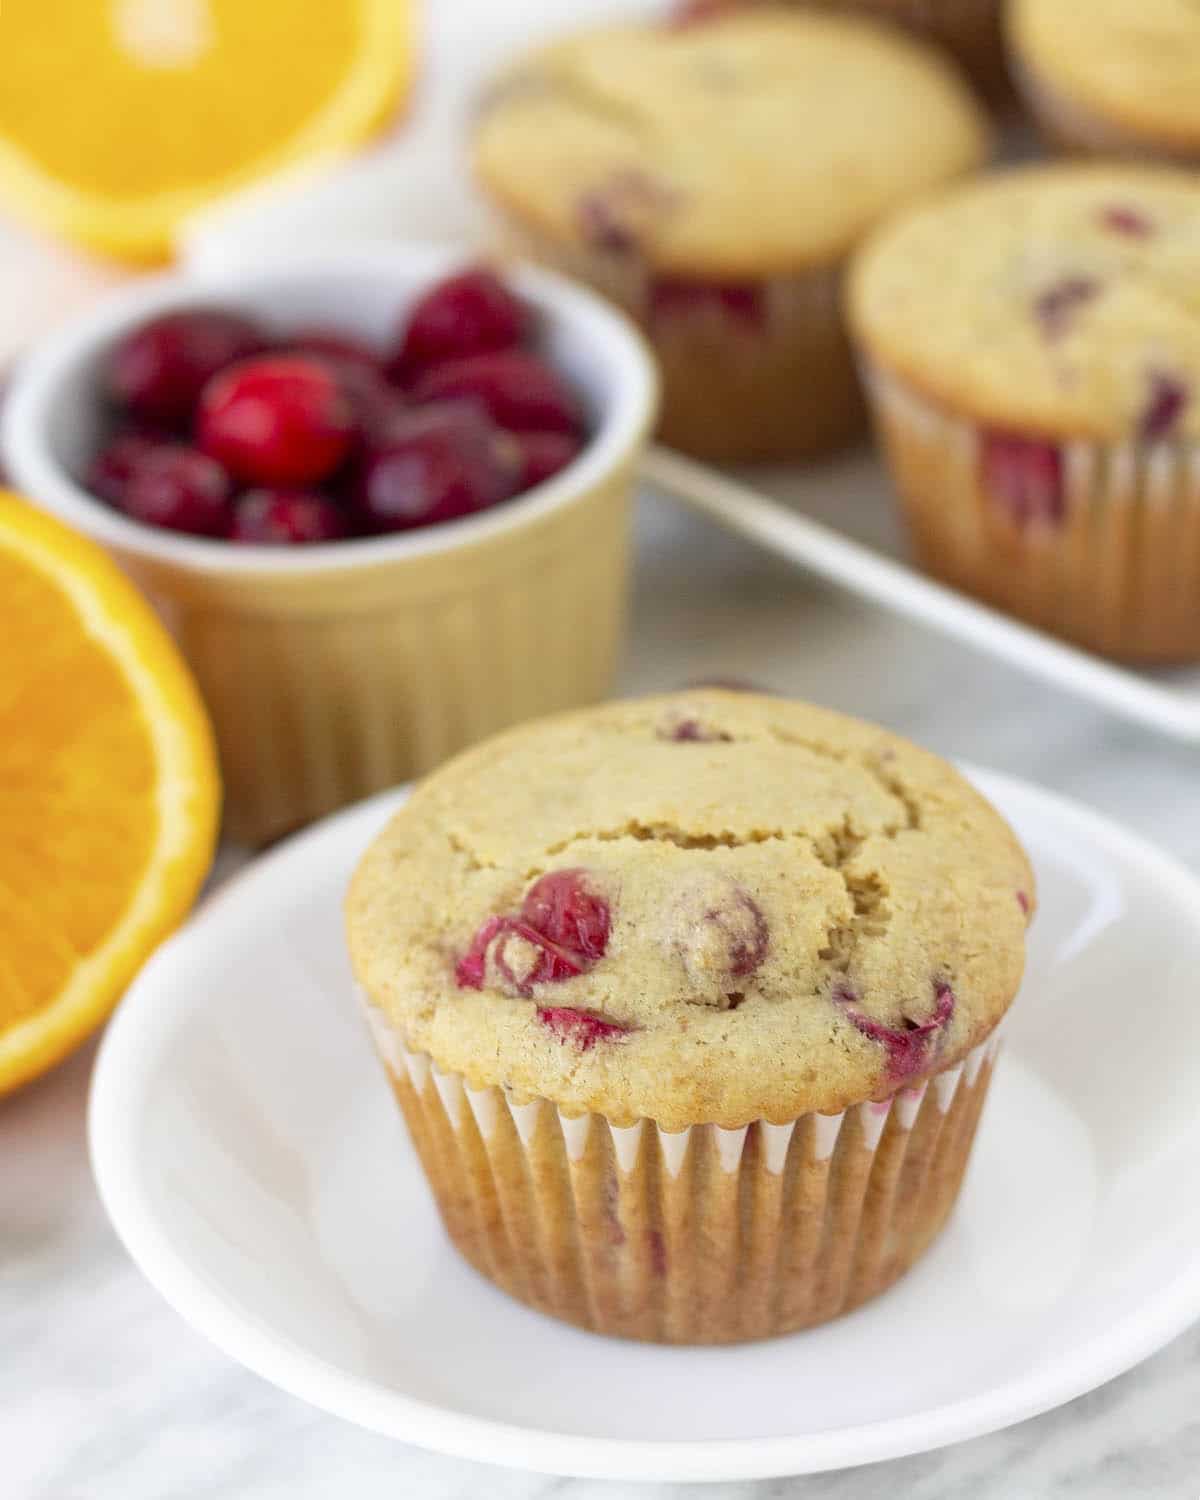 A cranberry orange muffin on a white plate, more muffins sit in the background as well as an orange and fresh cranberries.